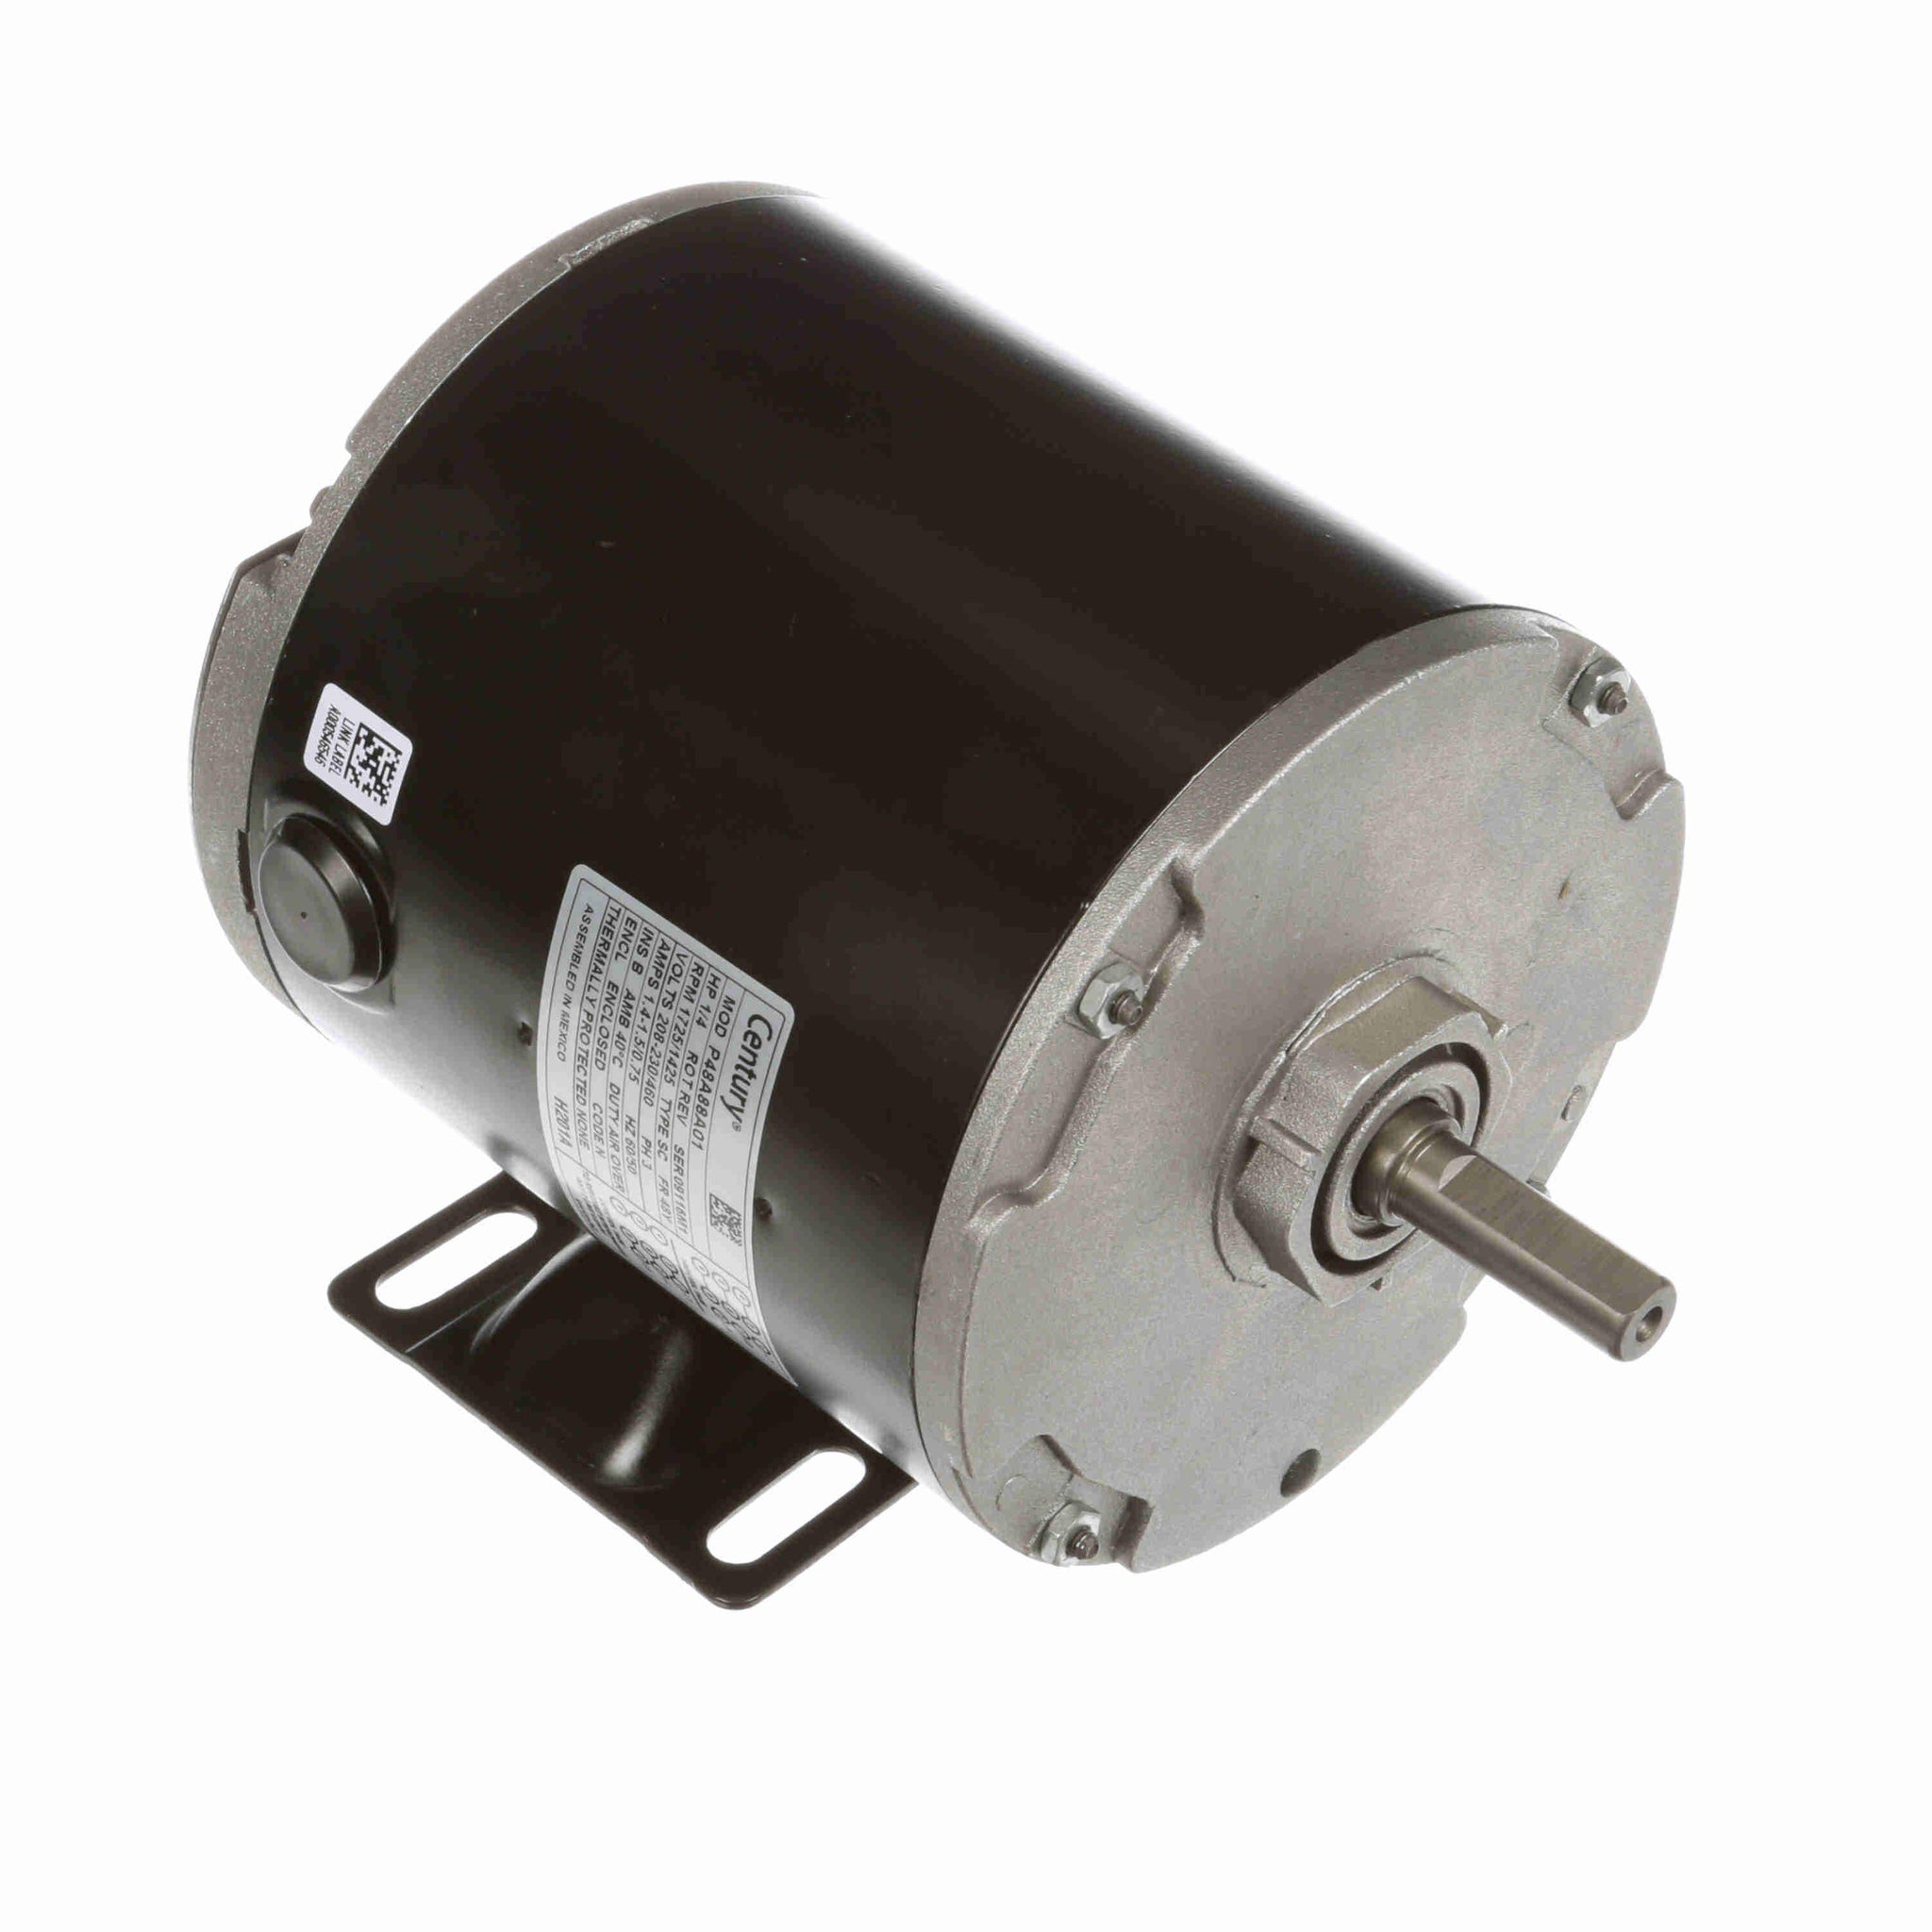 H201A -  1/4 HP 2 speed General Purpose Motor, 3 phase, 1800/1800 RPM, 208-230/460 V, 48Y Frame, TEAO - Hardware & Moreee